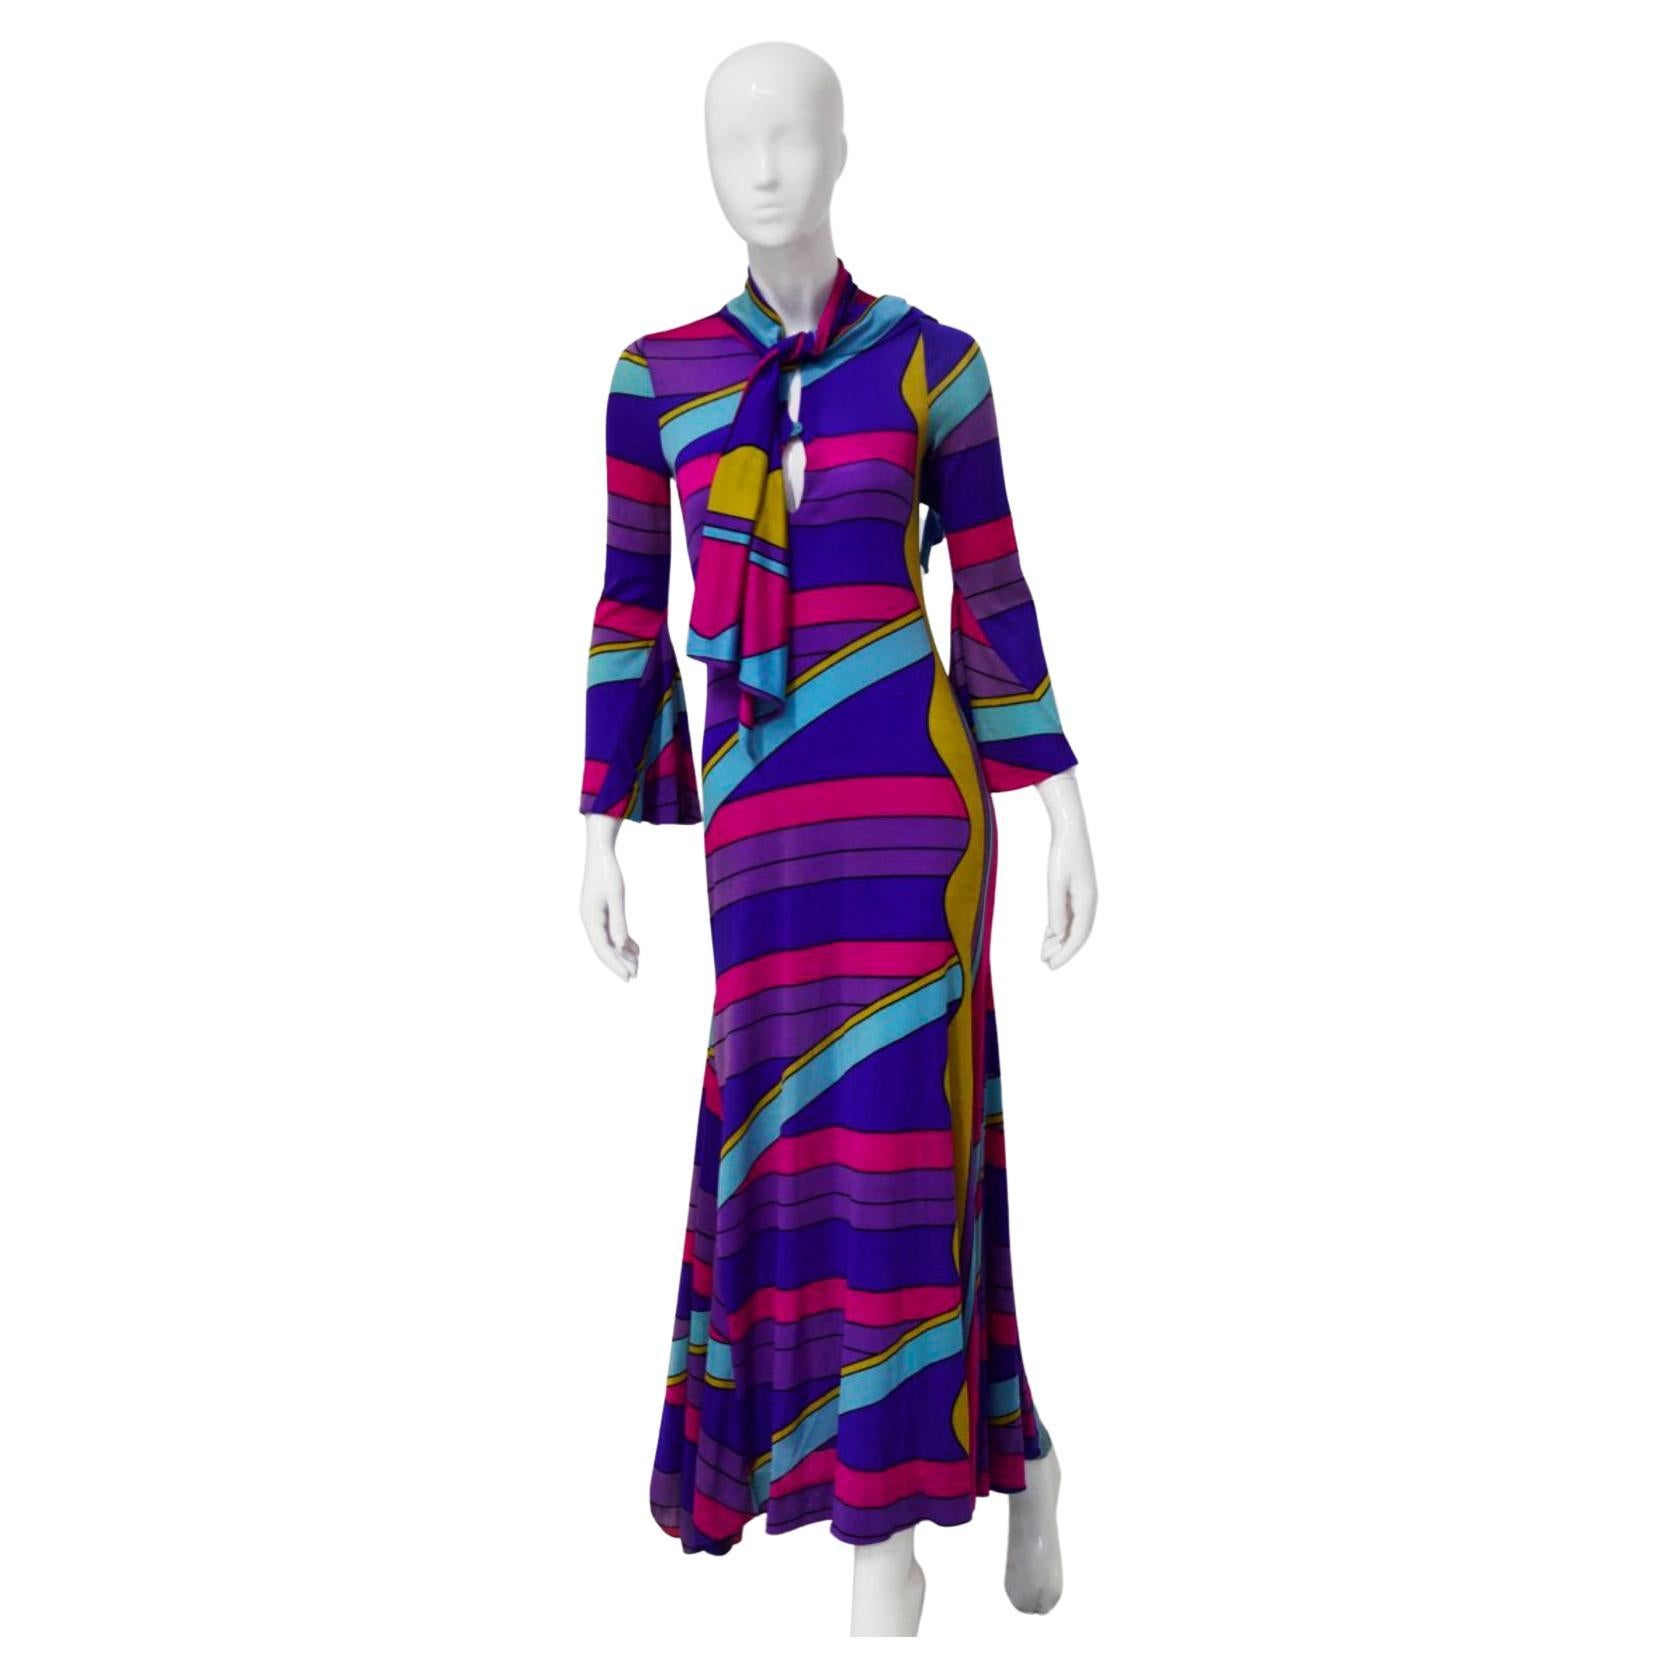 Psychedelic Louis Féraud maxi dress